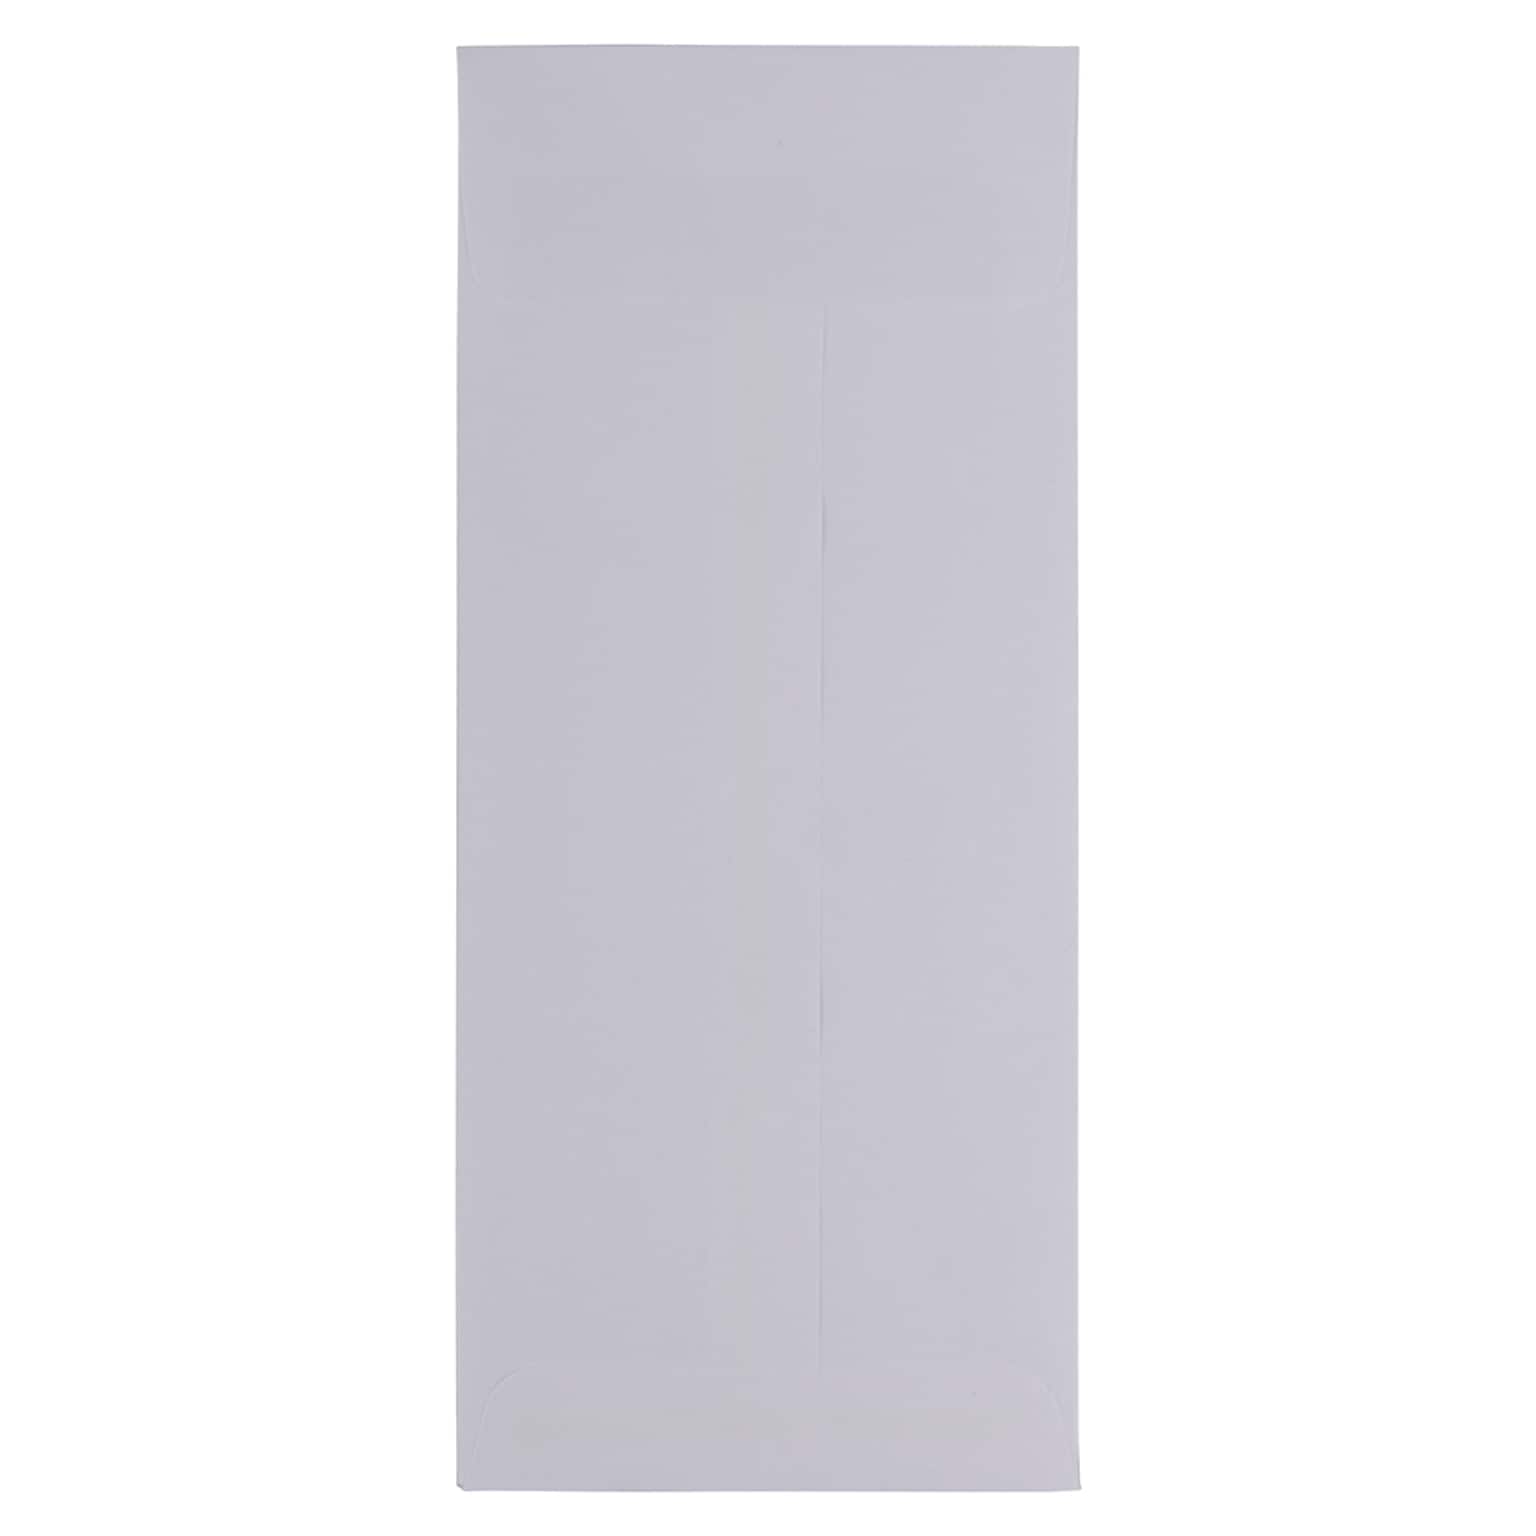 JAM Paper Open End #12 Currency Envelope, 4 3/4 x 11, White, 50/Pack (1623188I)